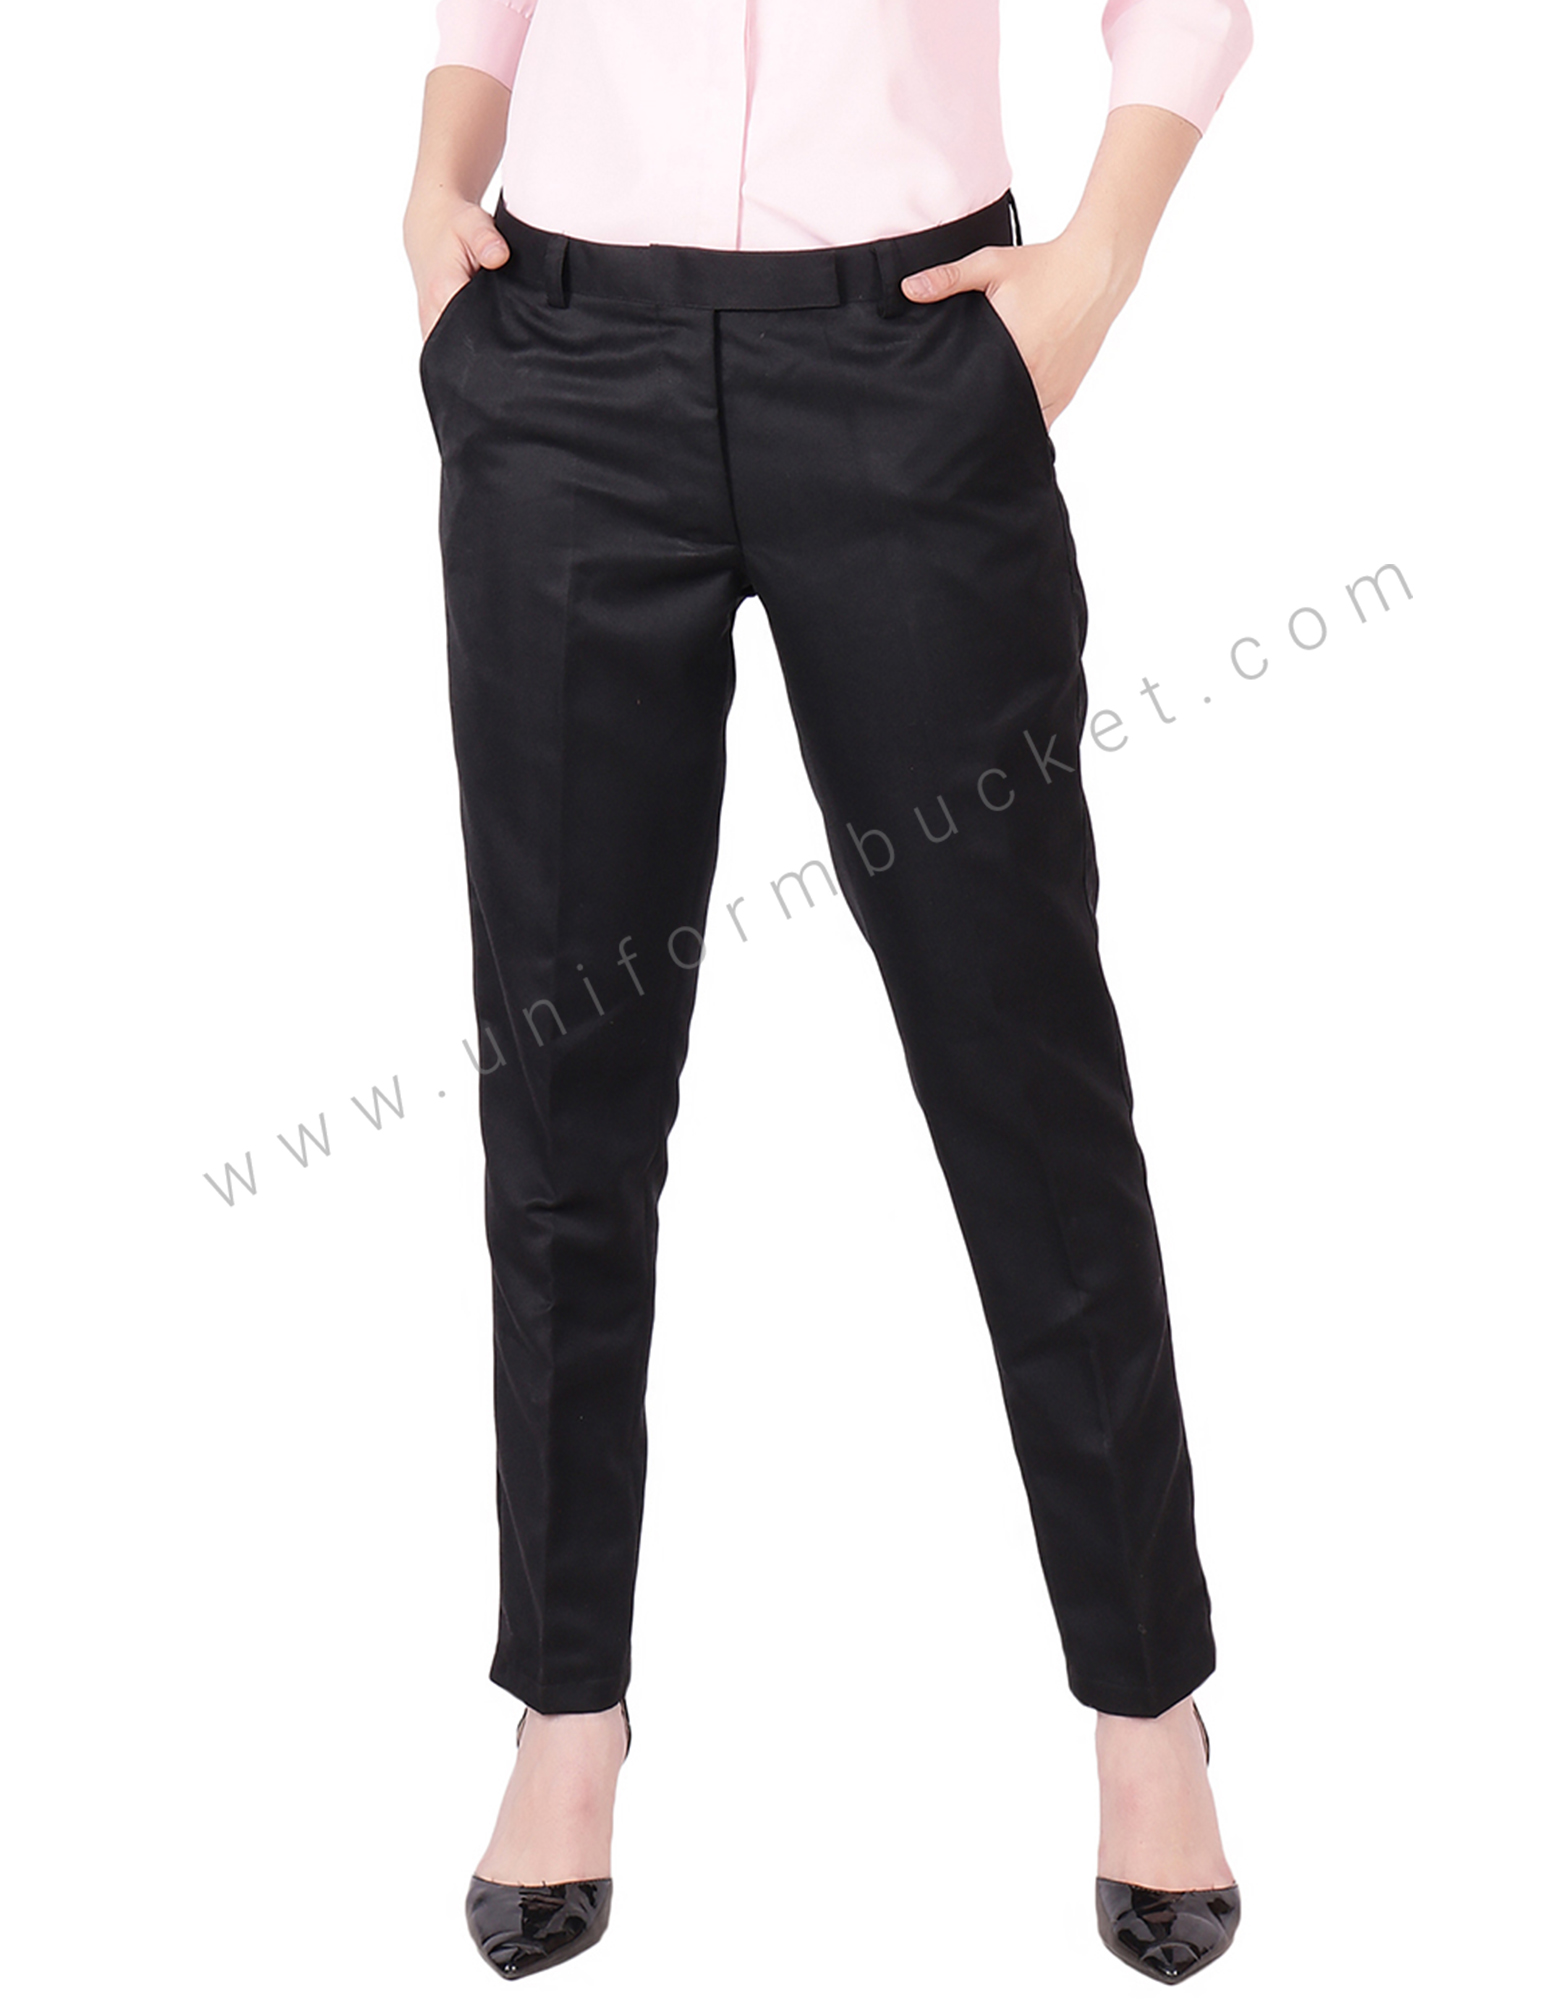 Buy Black Formal Trousers For Female Online @ Best Prices in India